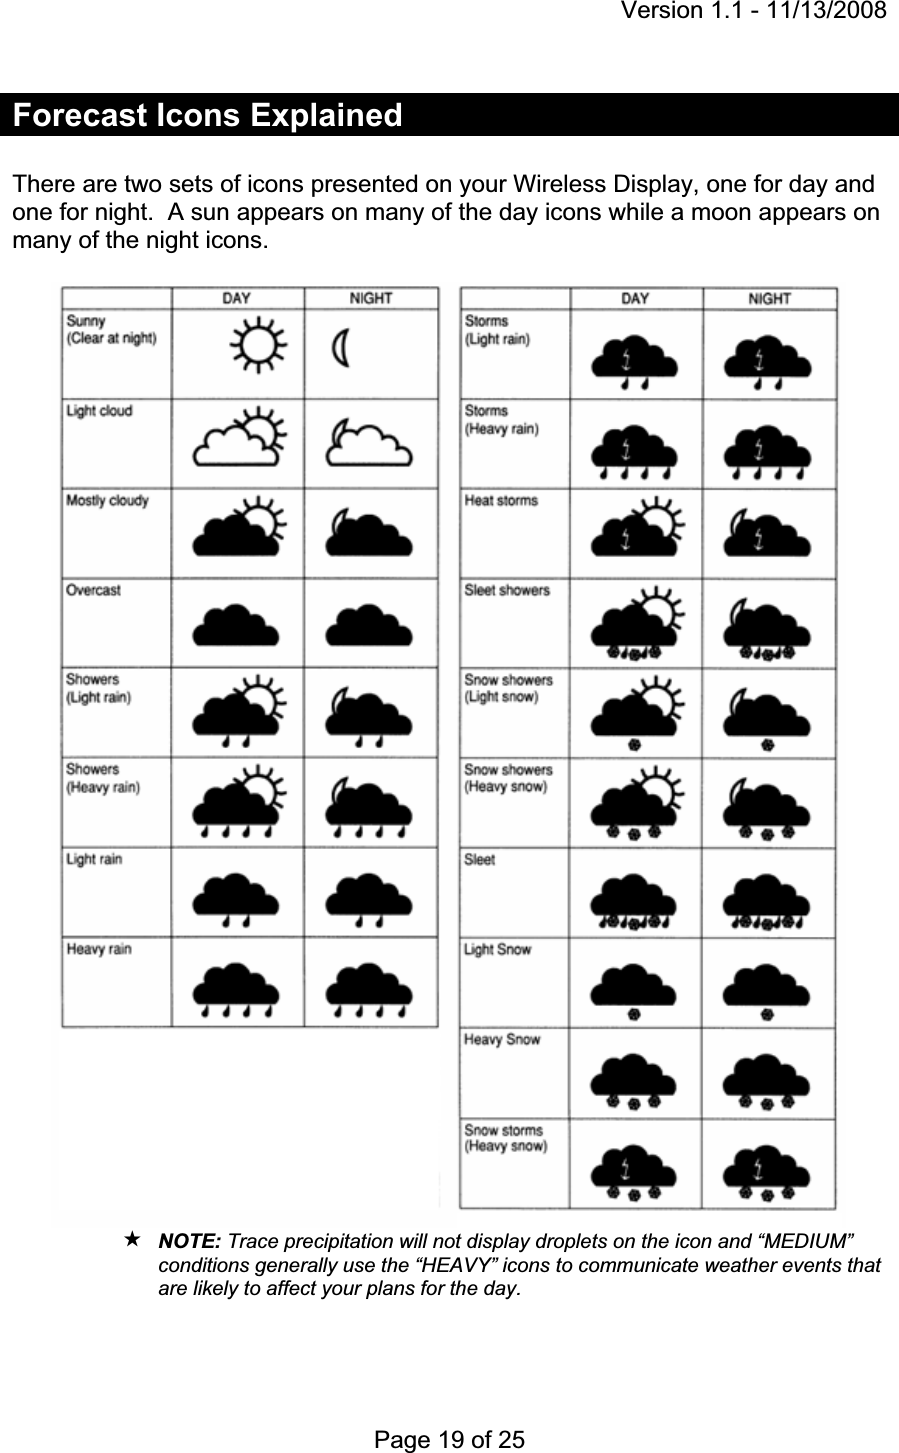 Version 1.1 - 11/13/2008 Page 19 of 25 Forecast Icons Explained There are two sets of icons presented on your Wireless Display, one for day and one for night.  A sun appears on many of the day icons while a moon appears on many of the night icons.NOTE: Trace precipitation will not display droplets on the icon and “MEDIUM” conditions generally use the “HEAVY” icons to communicate weather events that are likely to affect your plans for the day.